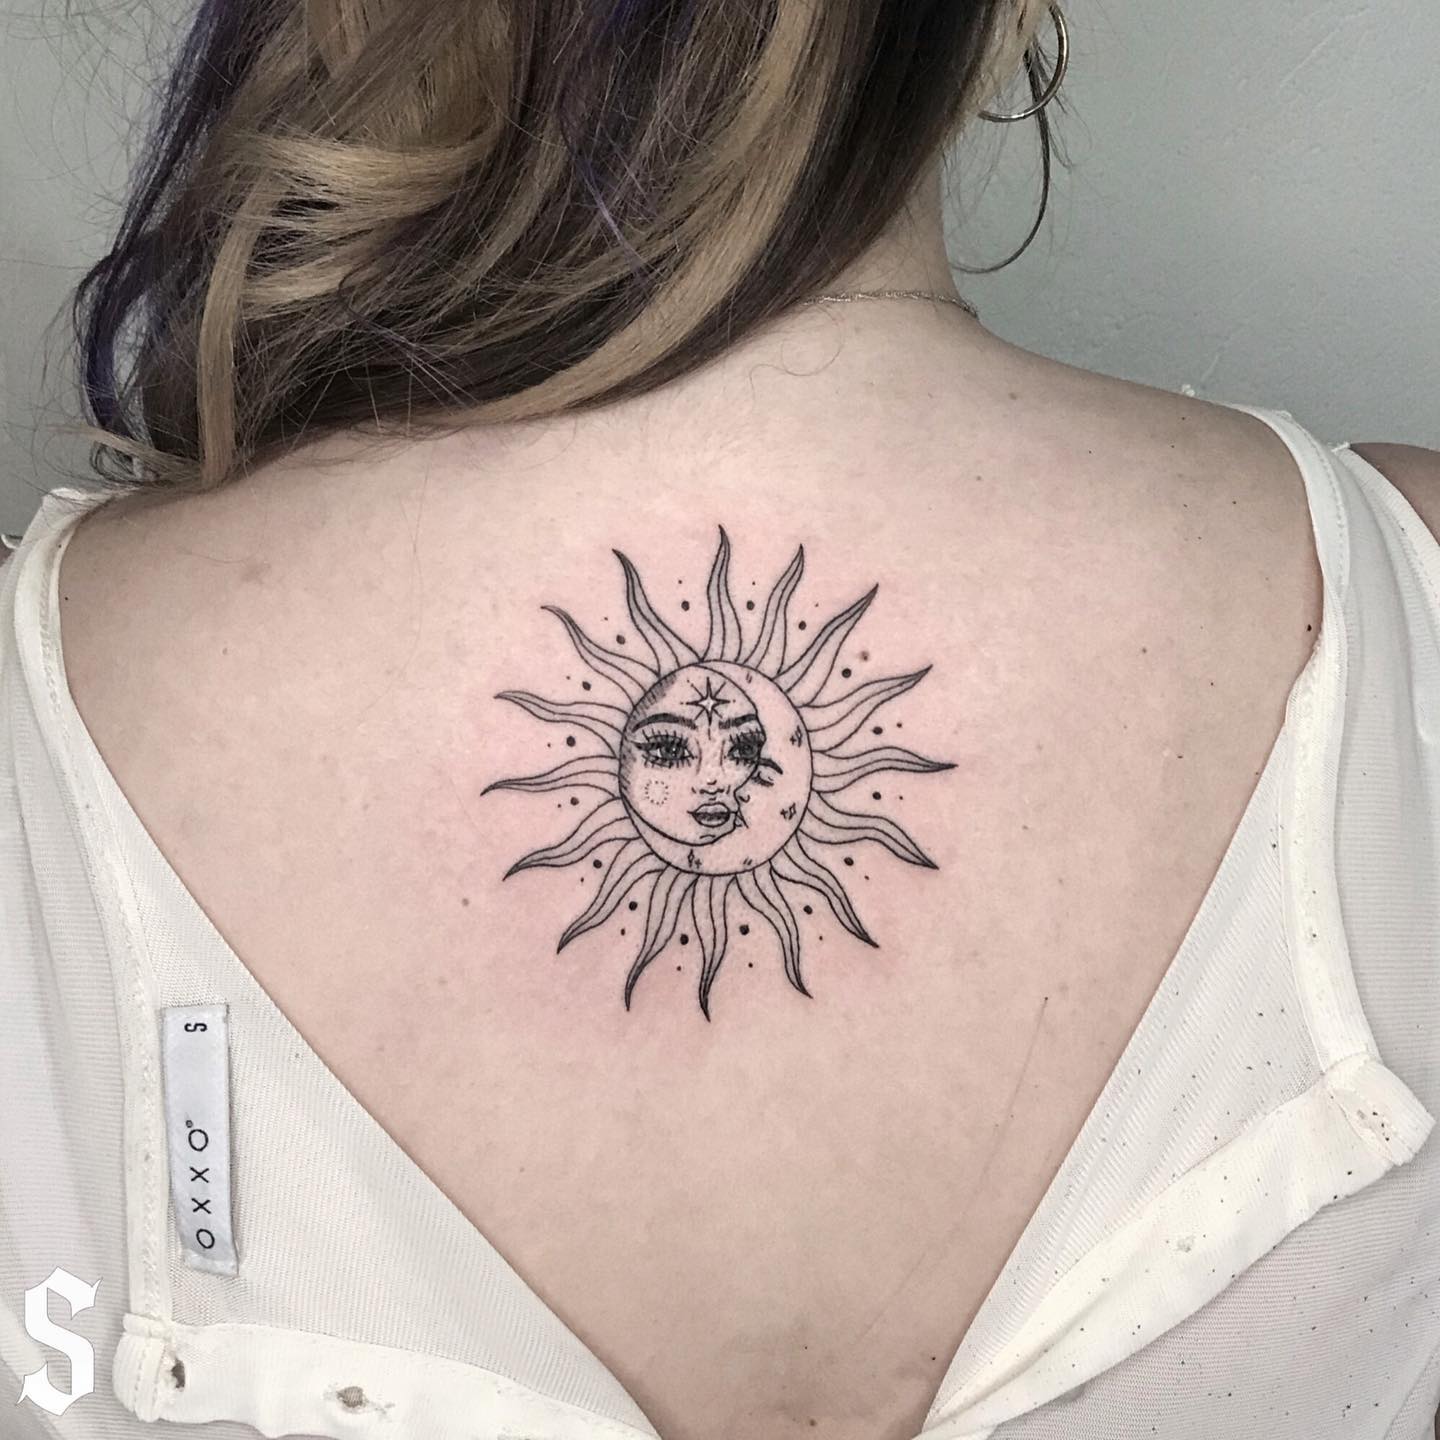 Upper back tattoo of the moon and the sun by Craigy